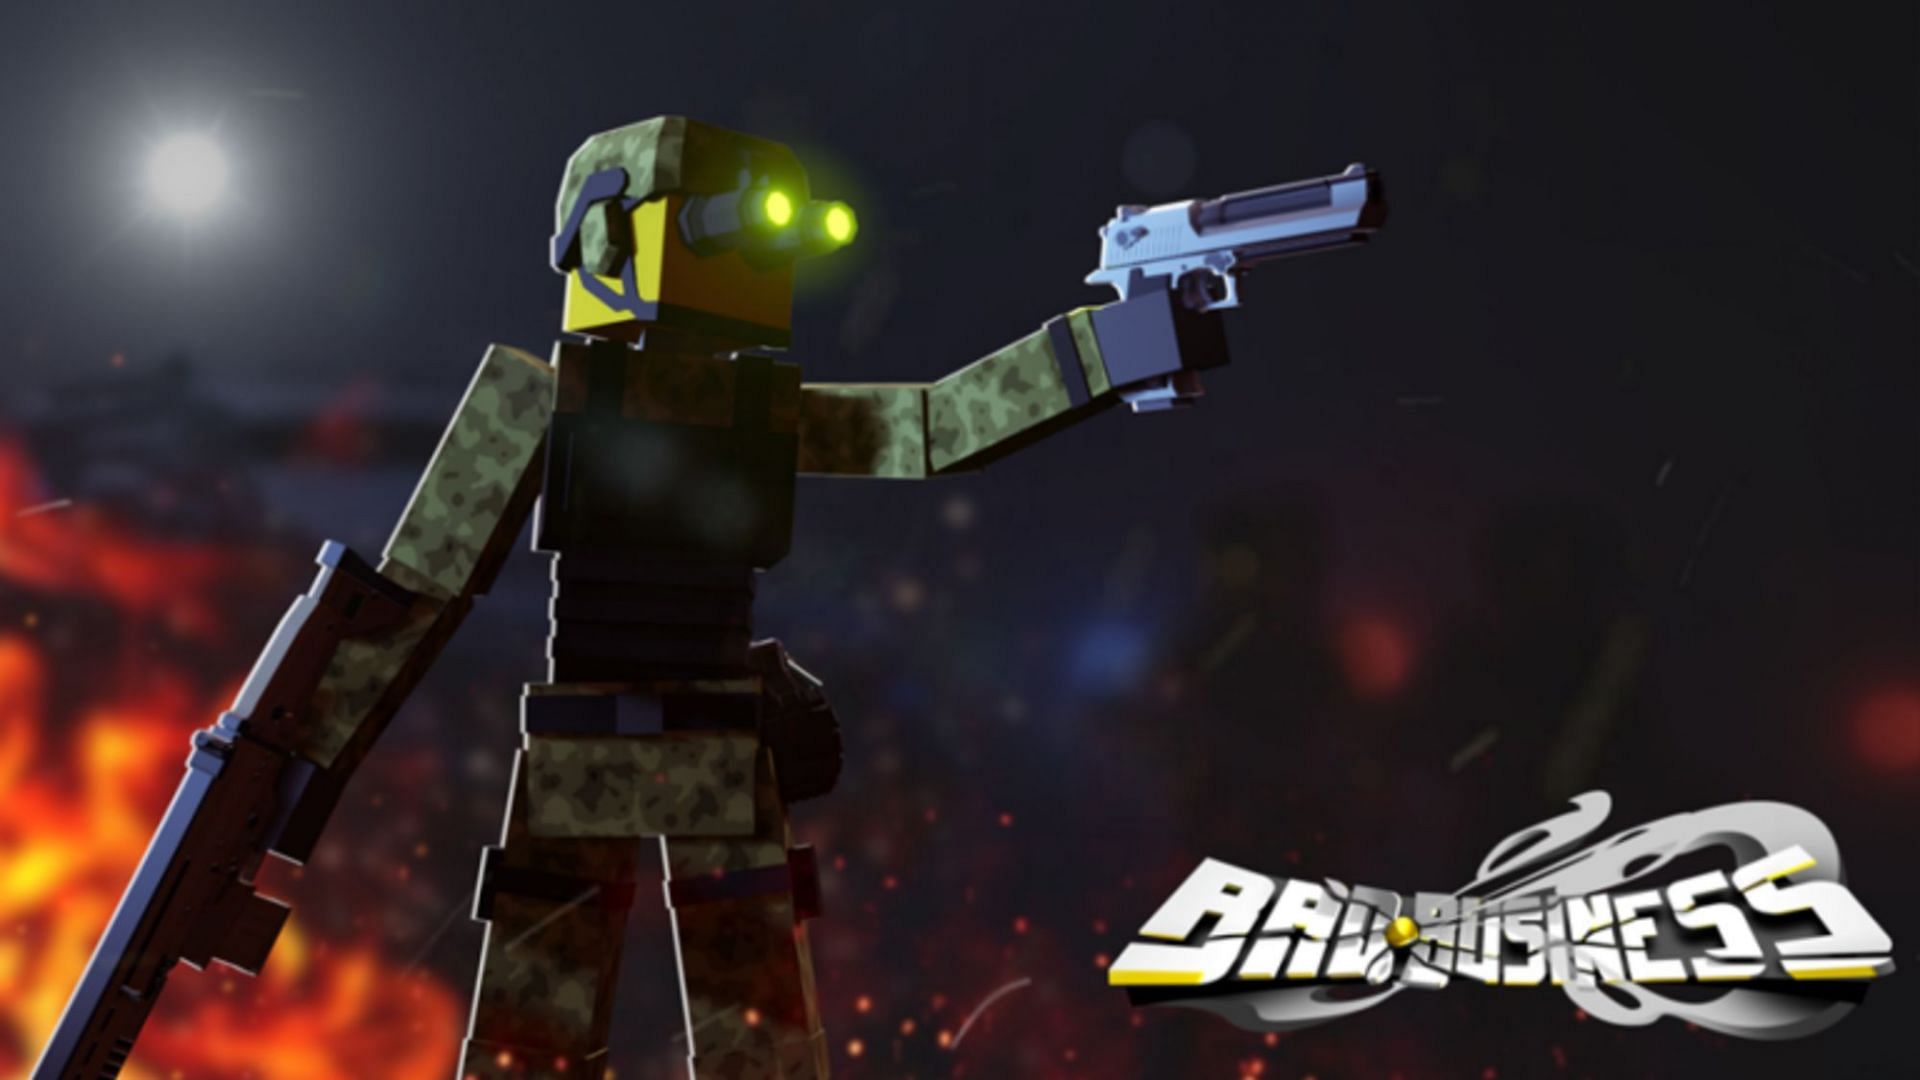 Sneak up on your enemies or go full Rambo on them in Bad Business (Image via Roblox) 